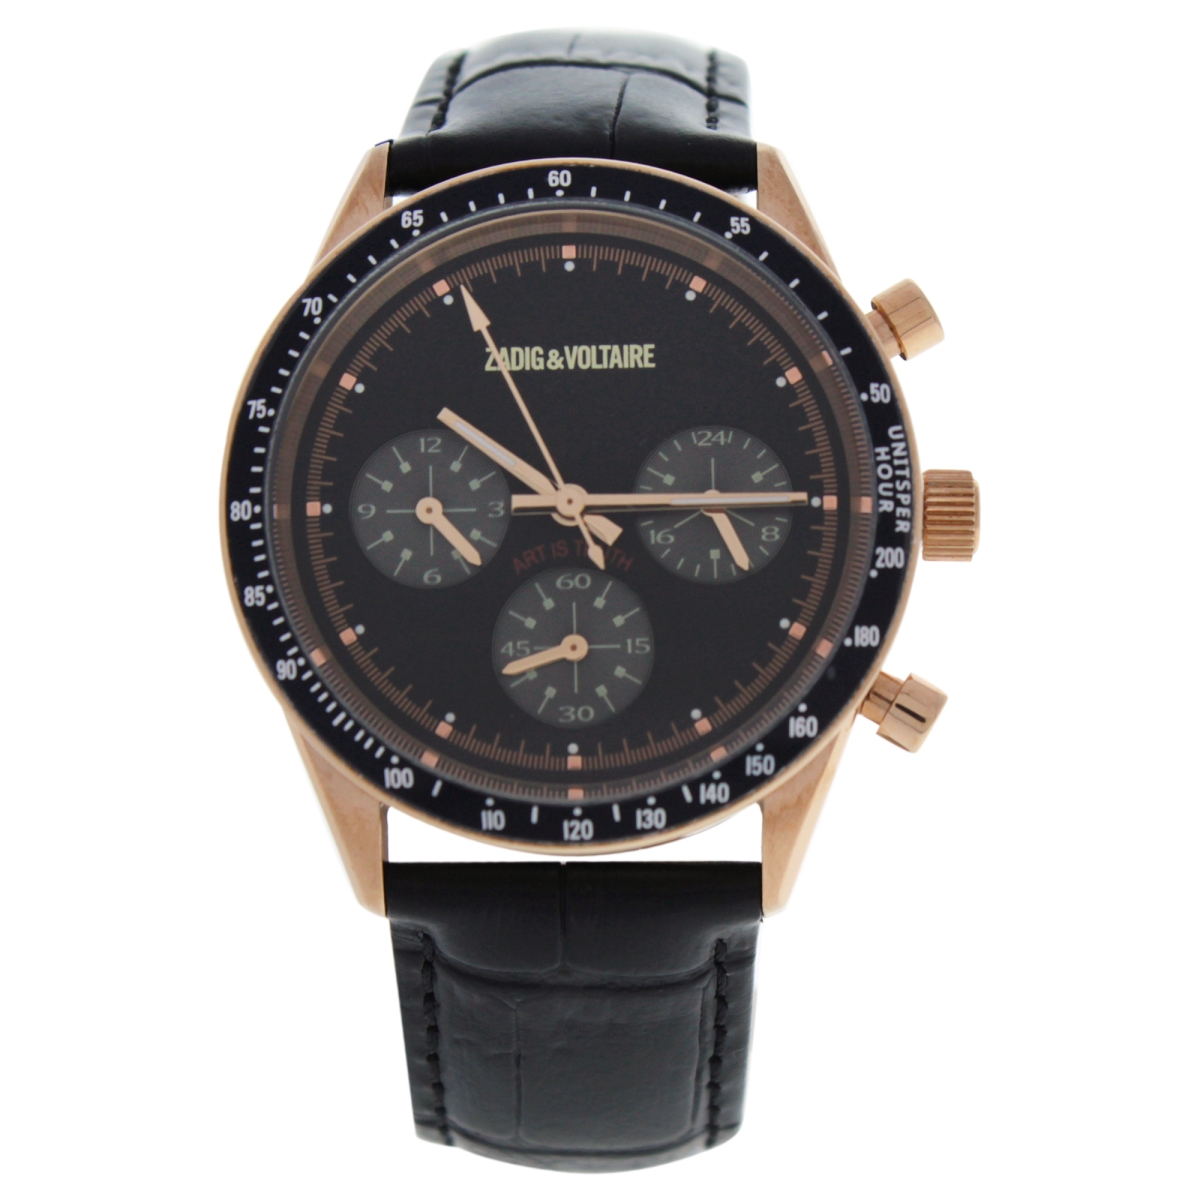 M-wat-1348 Zvm115 Black Leather Strap Wactch For Women - Rose Gold